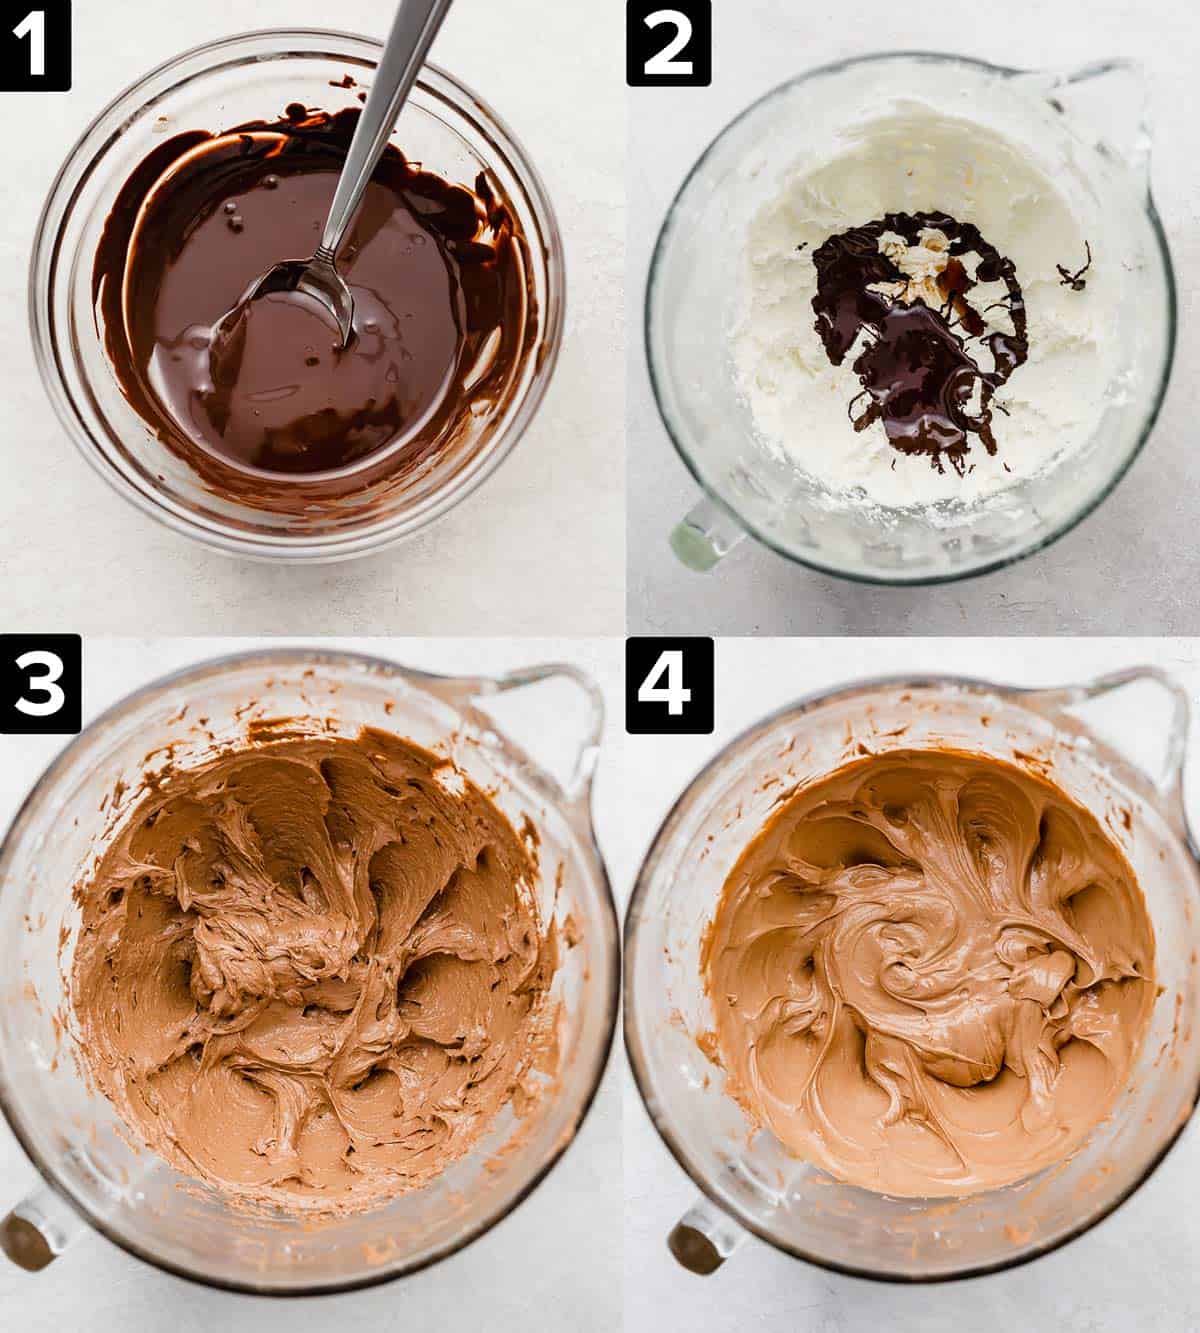 Four photos showing the process of making a French Silk Pie using raw eggs and melted chocolate.